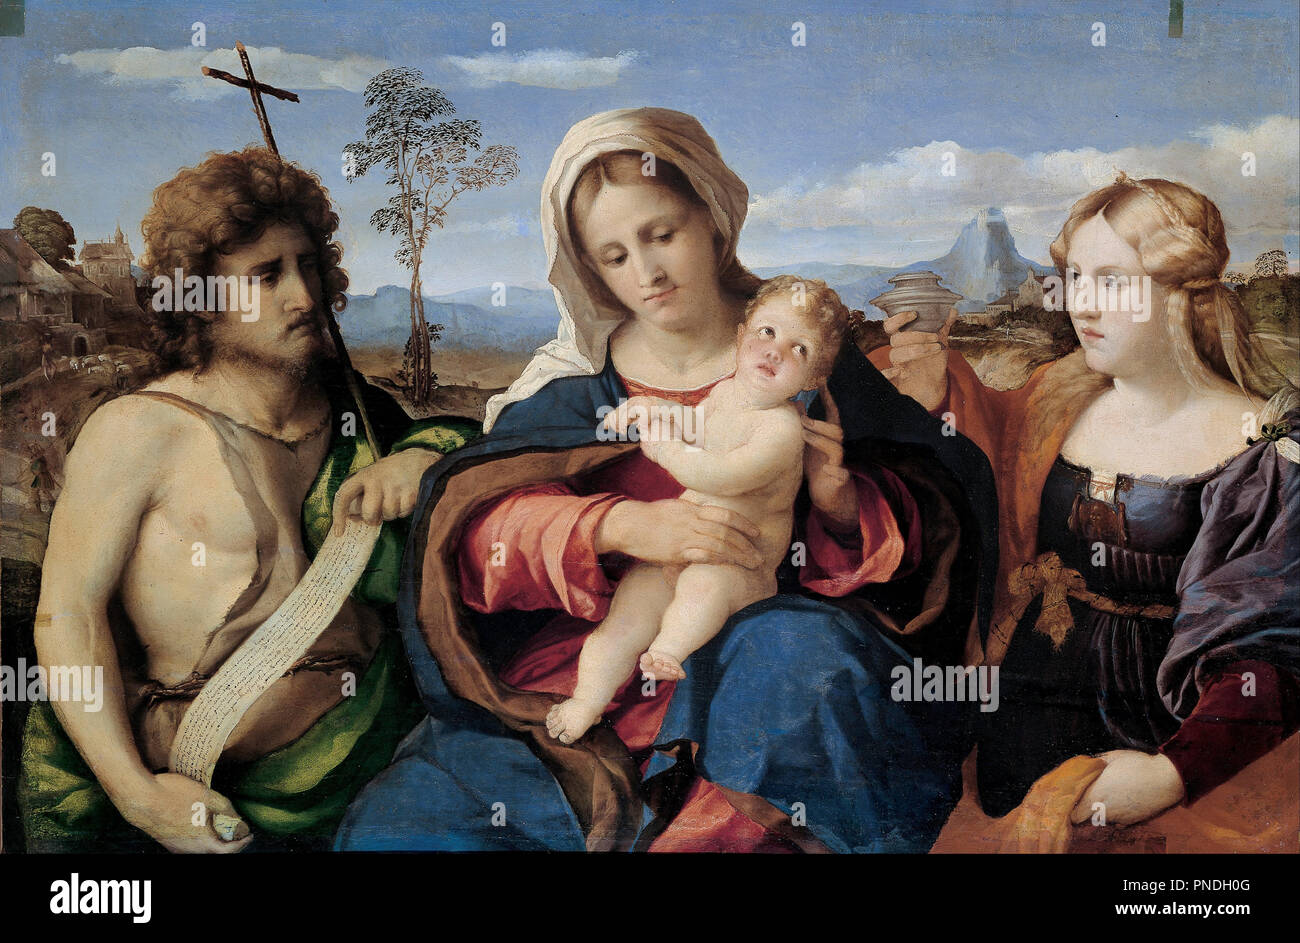 Madonna and Child with Saint John the Baptist and Magdalene. Date/Period: From 1520 until 1522. Painting. Oil on panel. Height: 710 mm (27.95 in); Width: 1,080 mm (42.51 in). Author: Palma Vecchio (Jacopo Nigretti). Palma il Vecchio, Jacopo, the Elder. Stock Photo